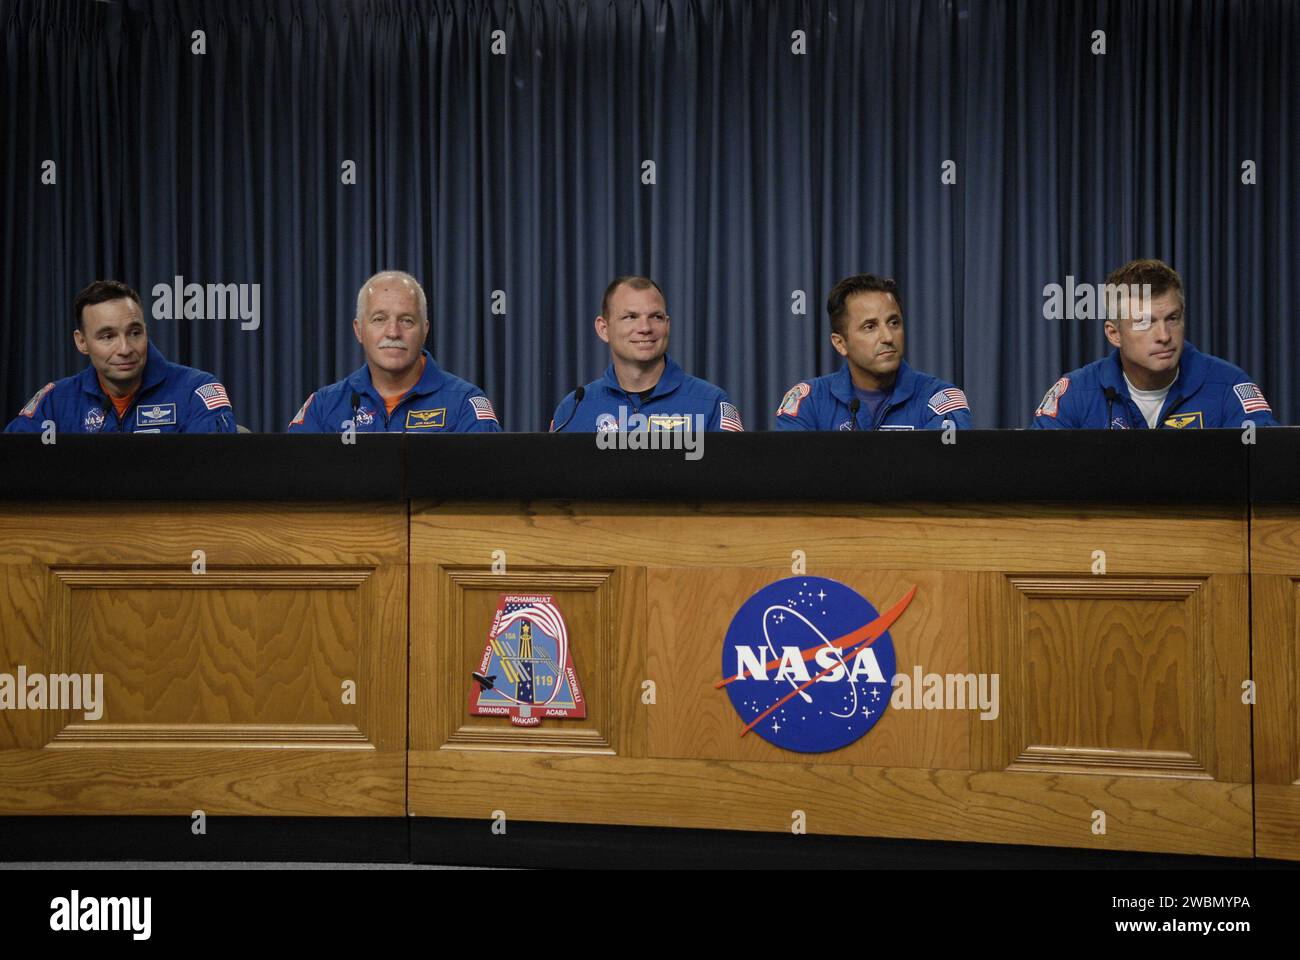 CAPE CANAVERAL, Fla. – At NASA's Kennedy Space Center in Florida, members of the STS-119 crew participate in a news conference following landing of the space shuttle Discovery STS-119 mission to the International Space Station. From left are Commander Lee Archambault, Mission Specialist John Phillips, Pilot Tony Antonelli and Mission Specialists Joseph Acaba and Steve Swanson.  Main gear touchdown was at 3:13:17 p.m. EDT.  Nose gear touchdown was at 3:13:40 p.m. and wheels stop was at 3:14:45 p.m.  Discovery delivered the final pair of large power-generating solar array wings and the S6 truss Stock Photo